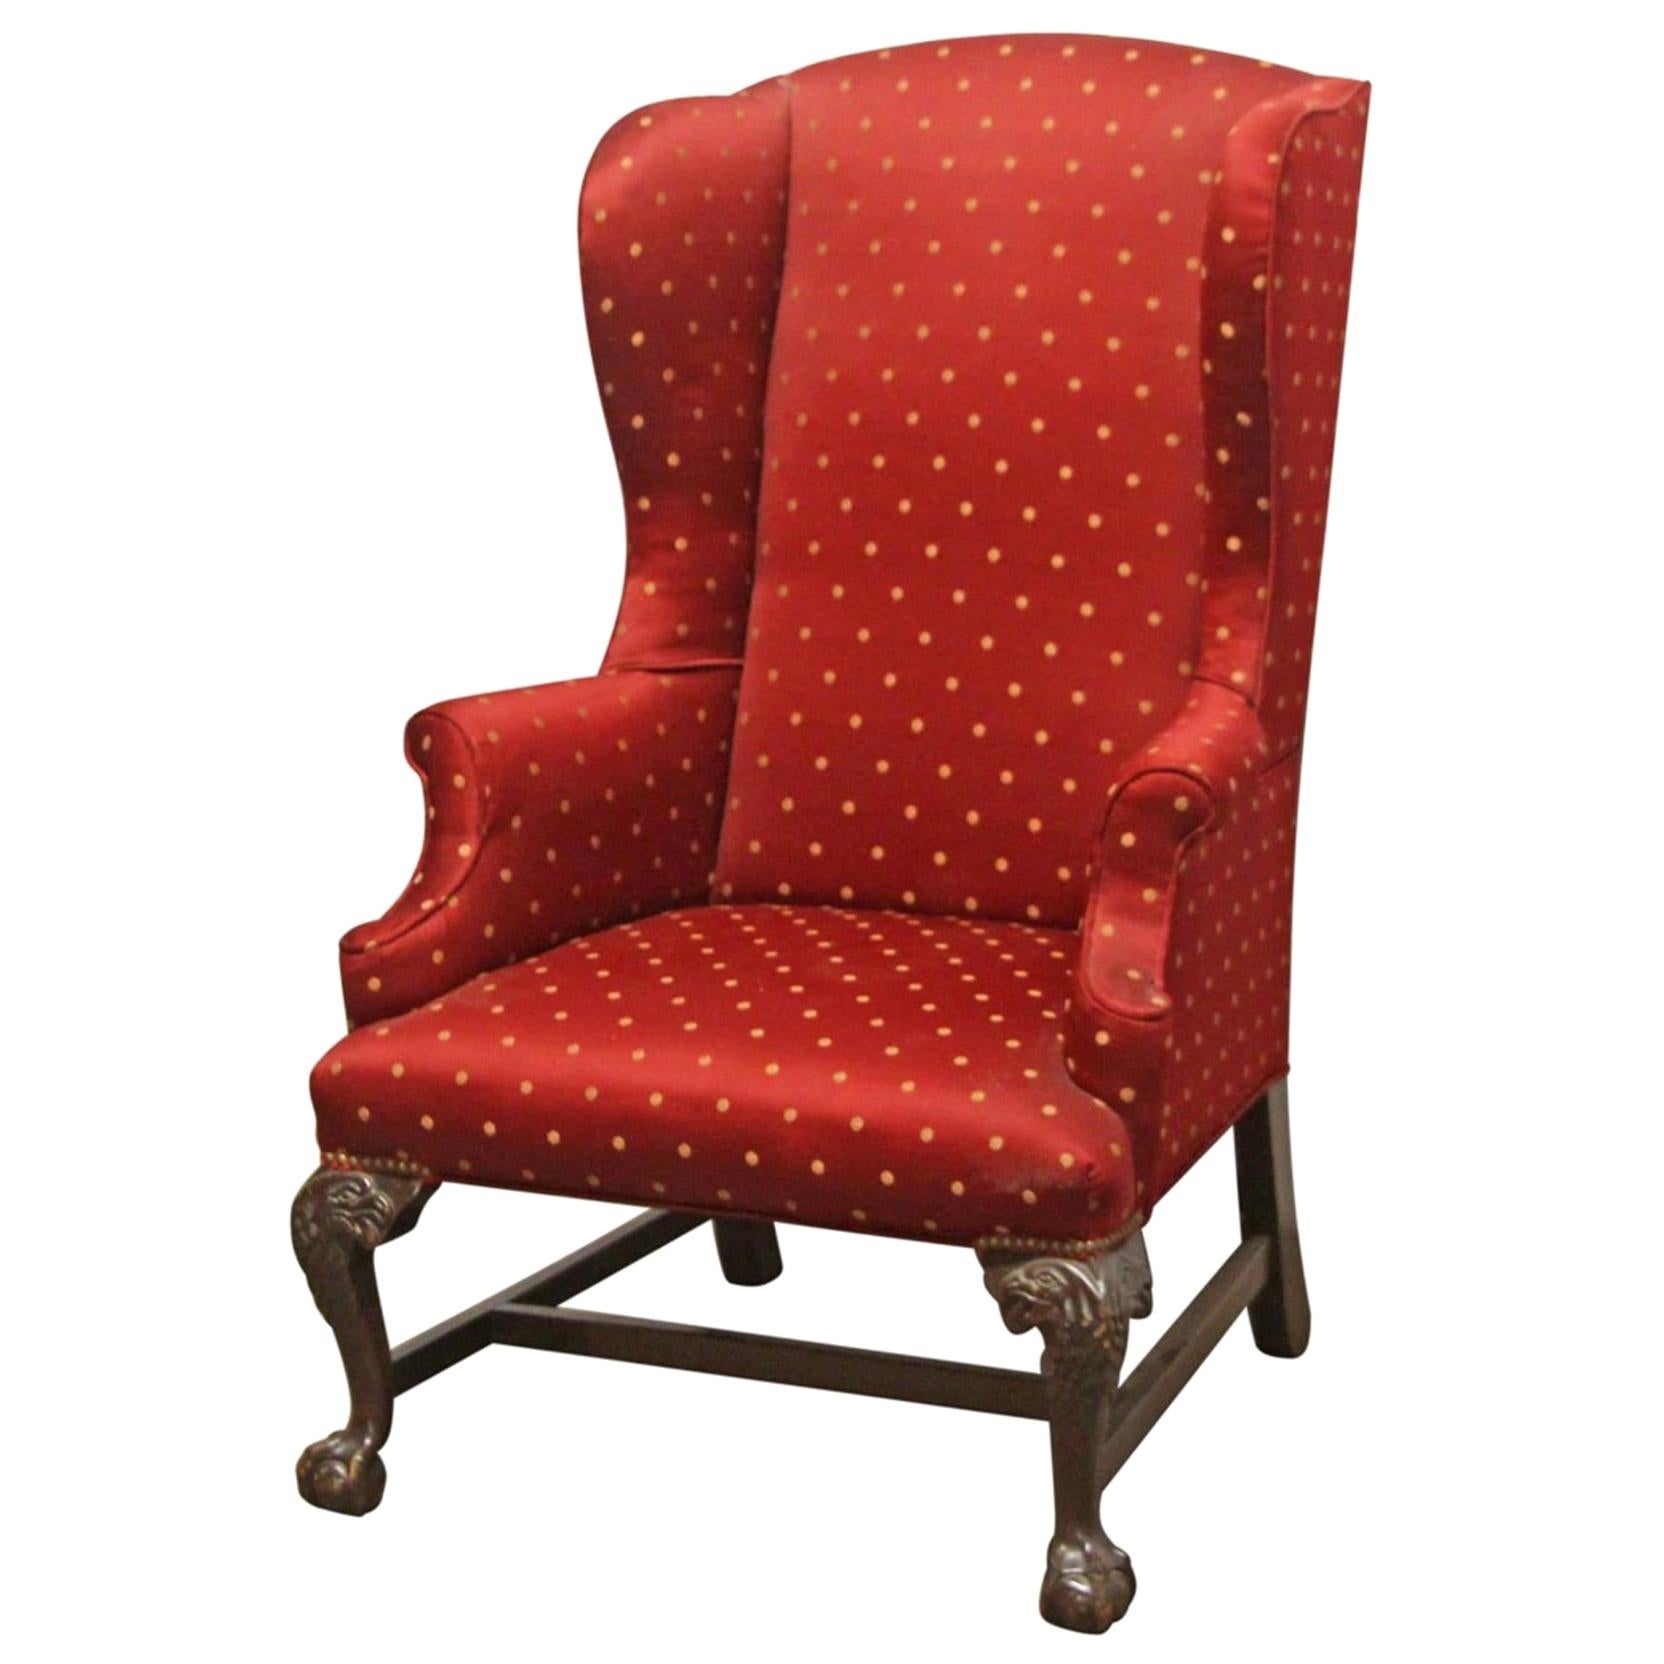 1890s Wing Back Chair with Carved Dark Tone Wood Legs and Red Gold Upholstery